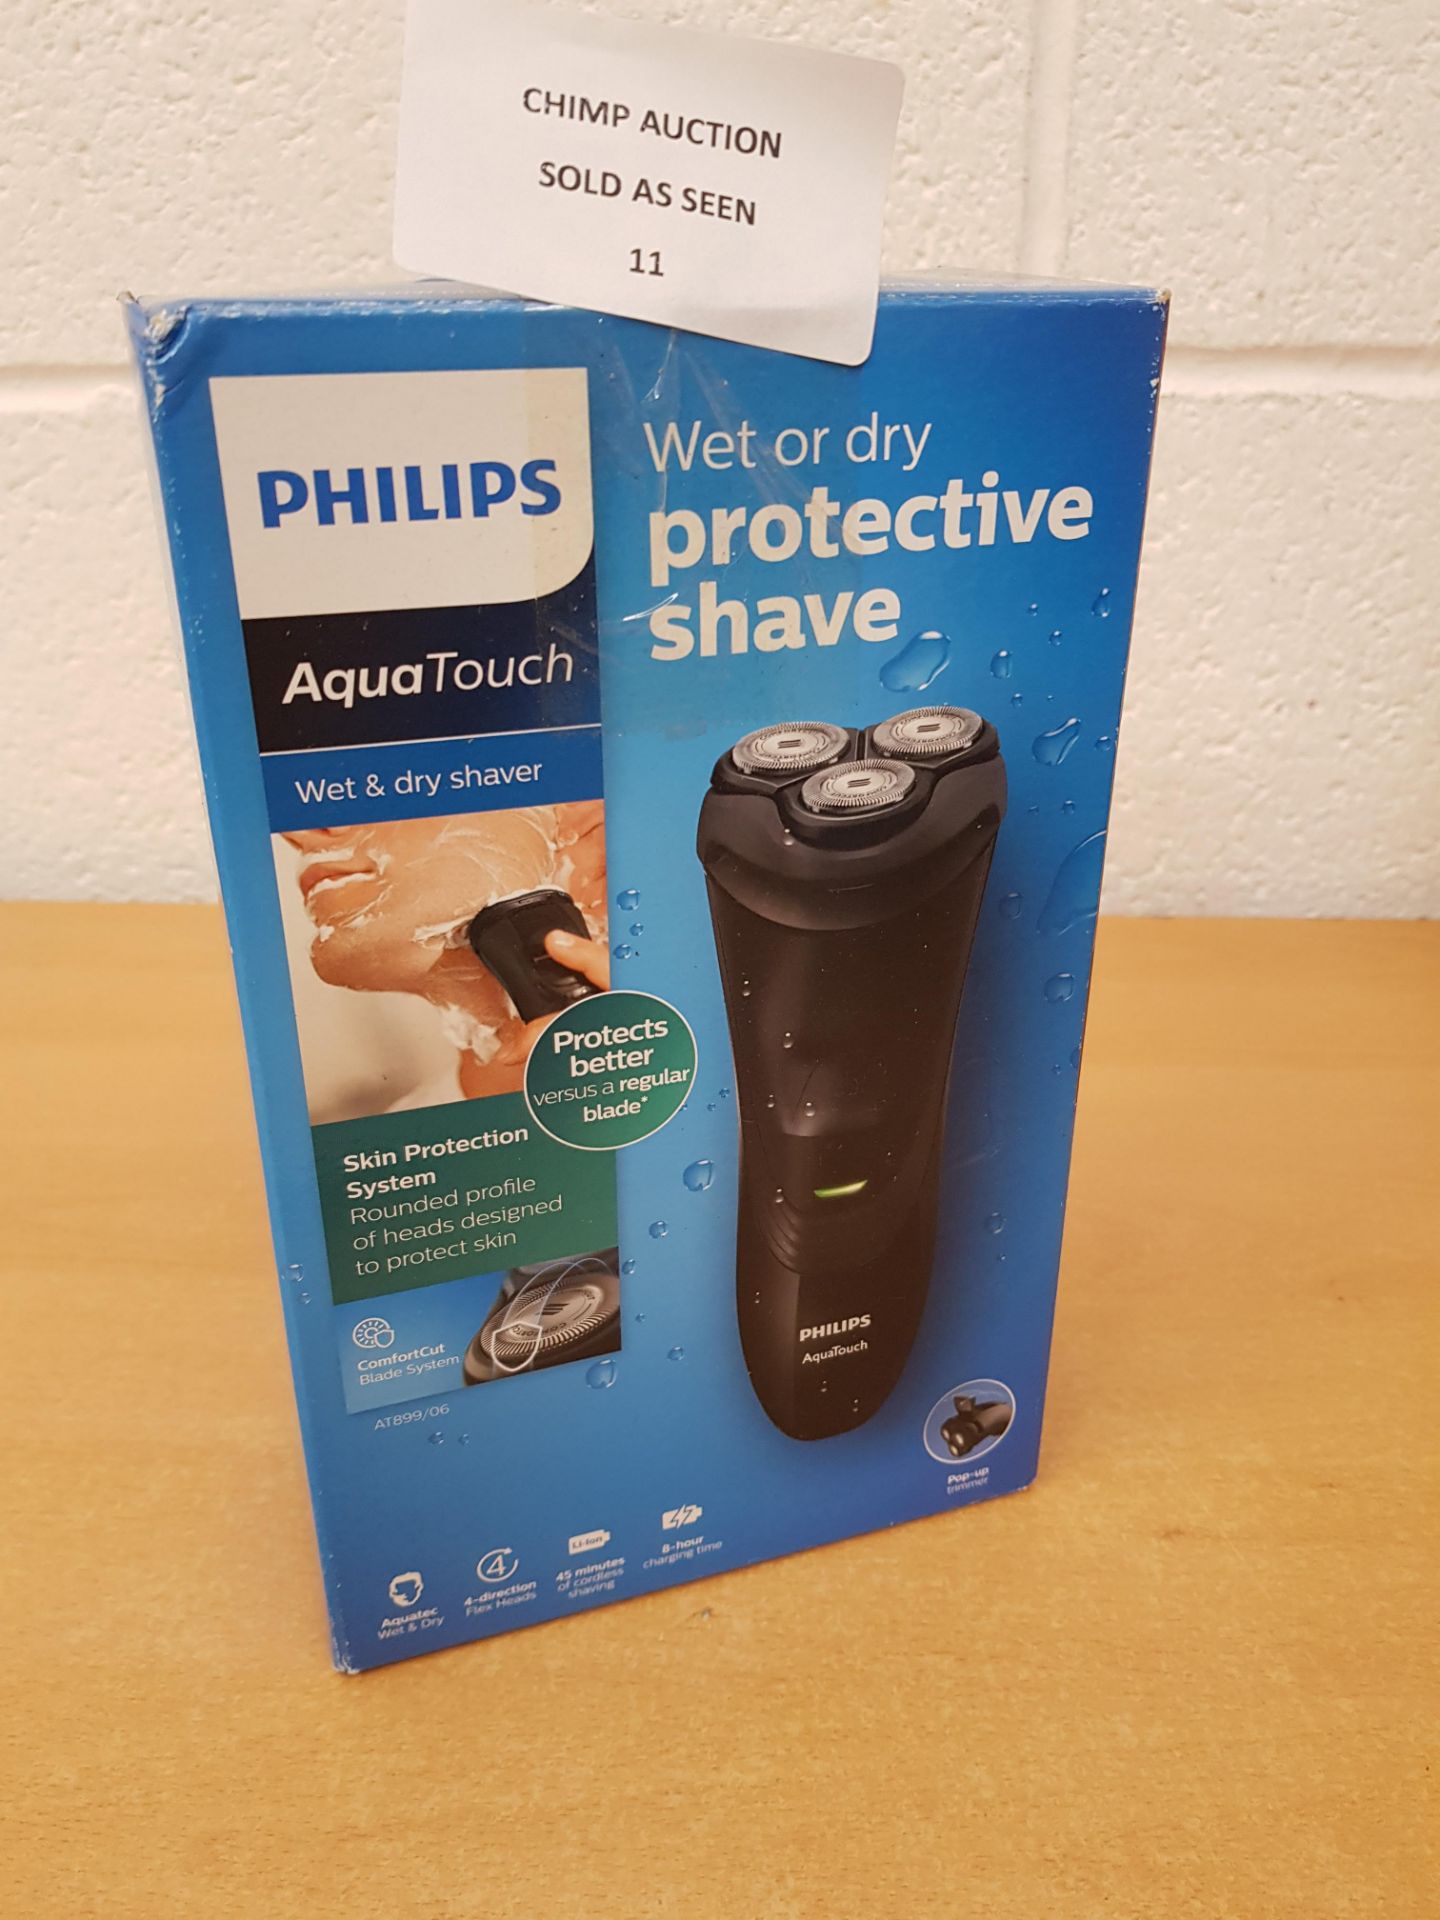 Philips AquaTouch Wet & Dry Men's Electric Shaver AT899 RRP £110